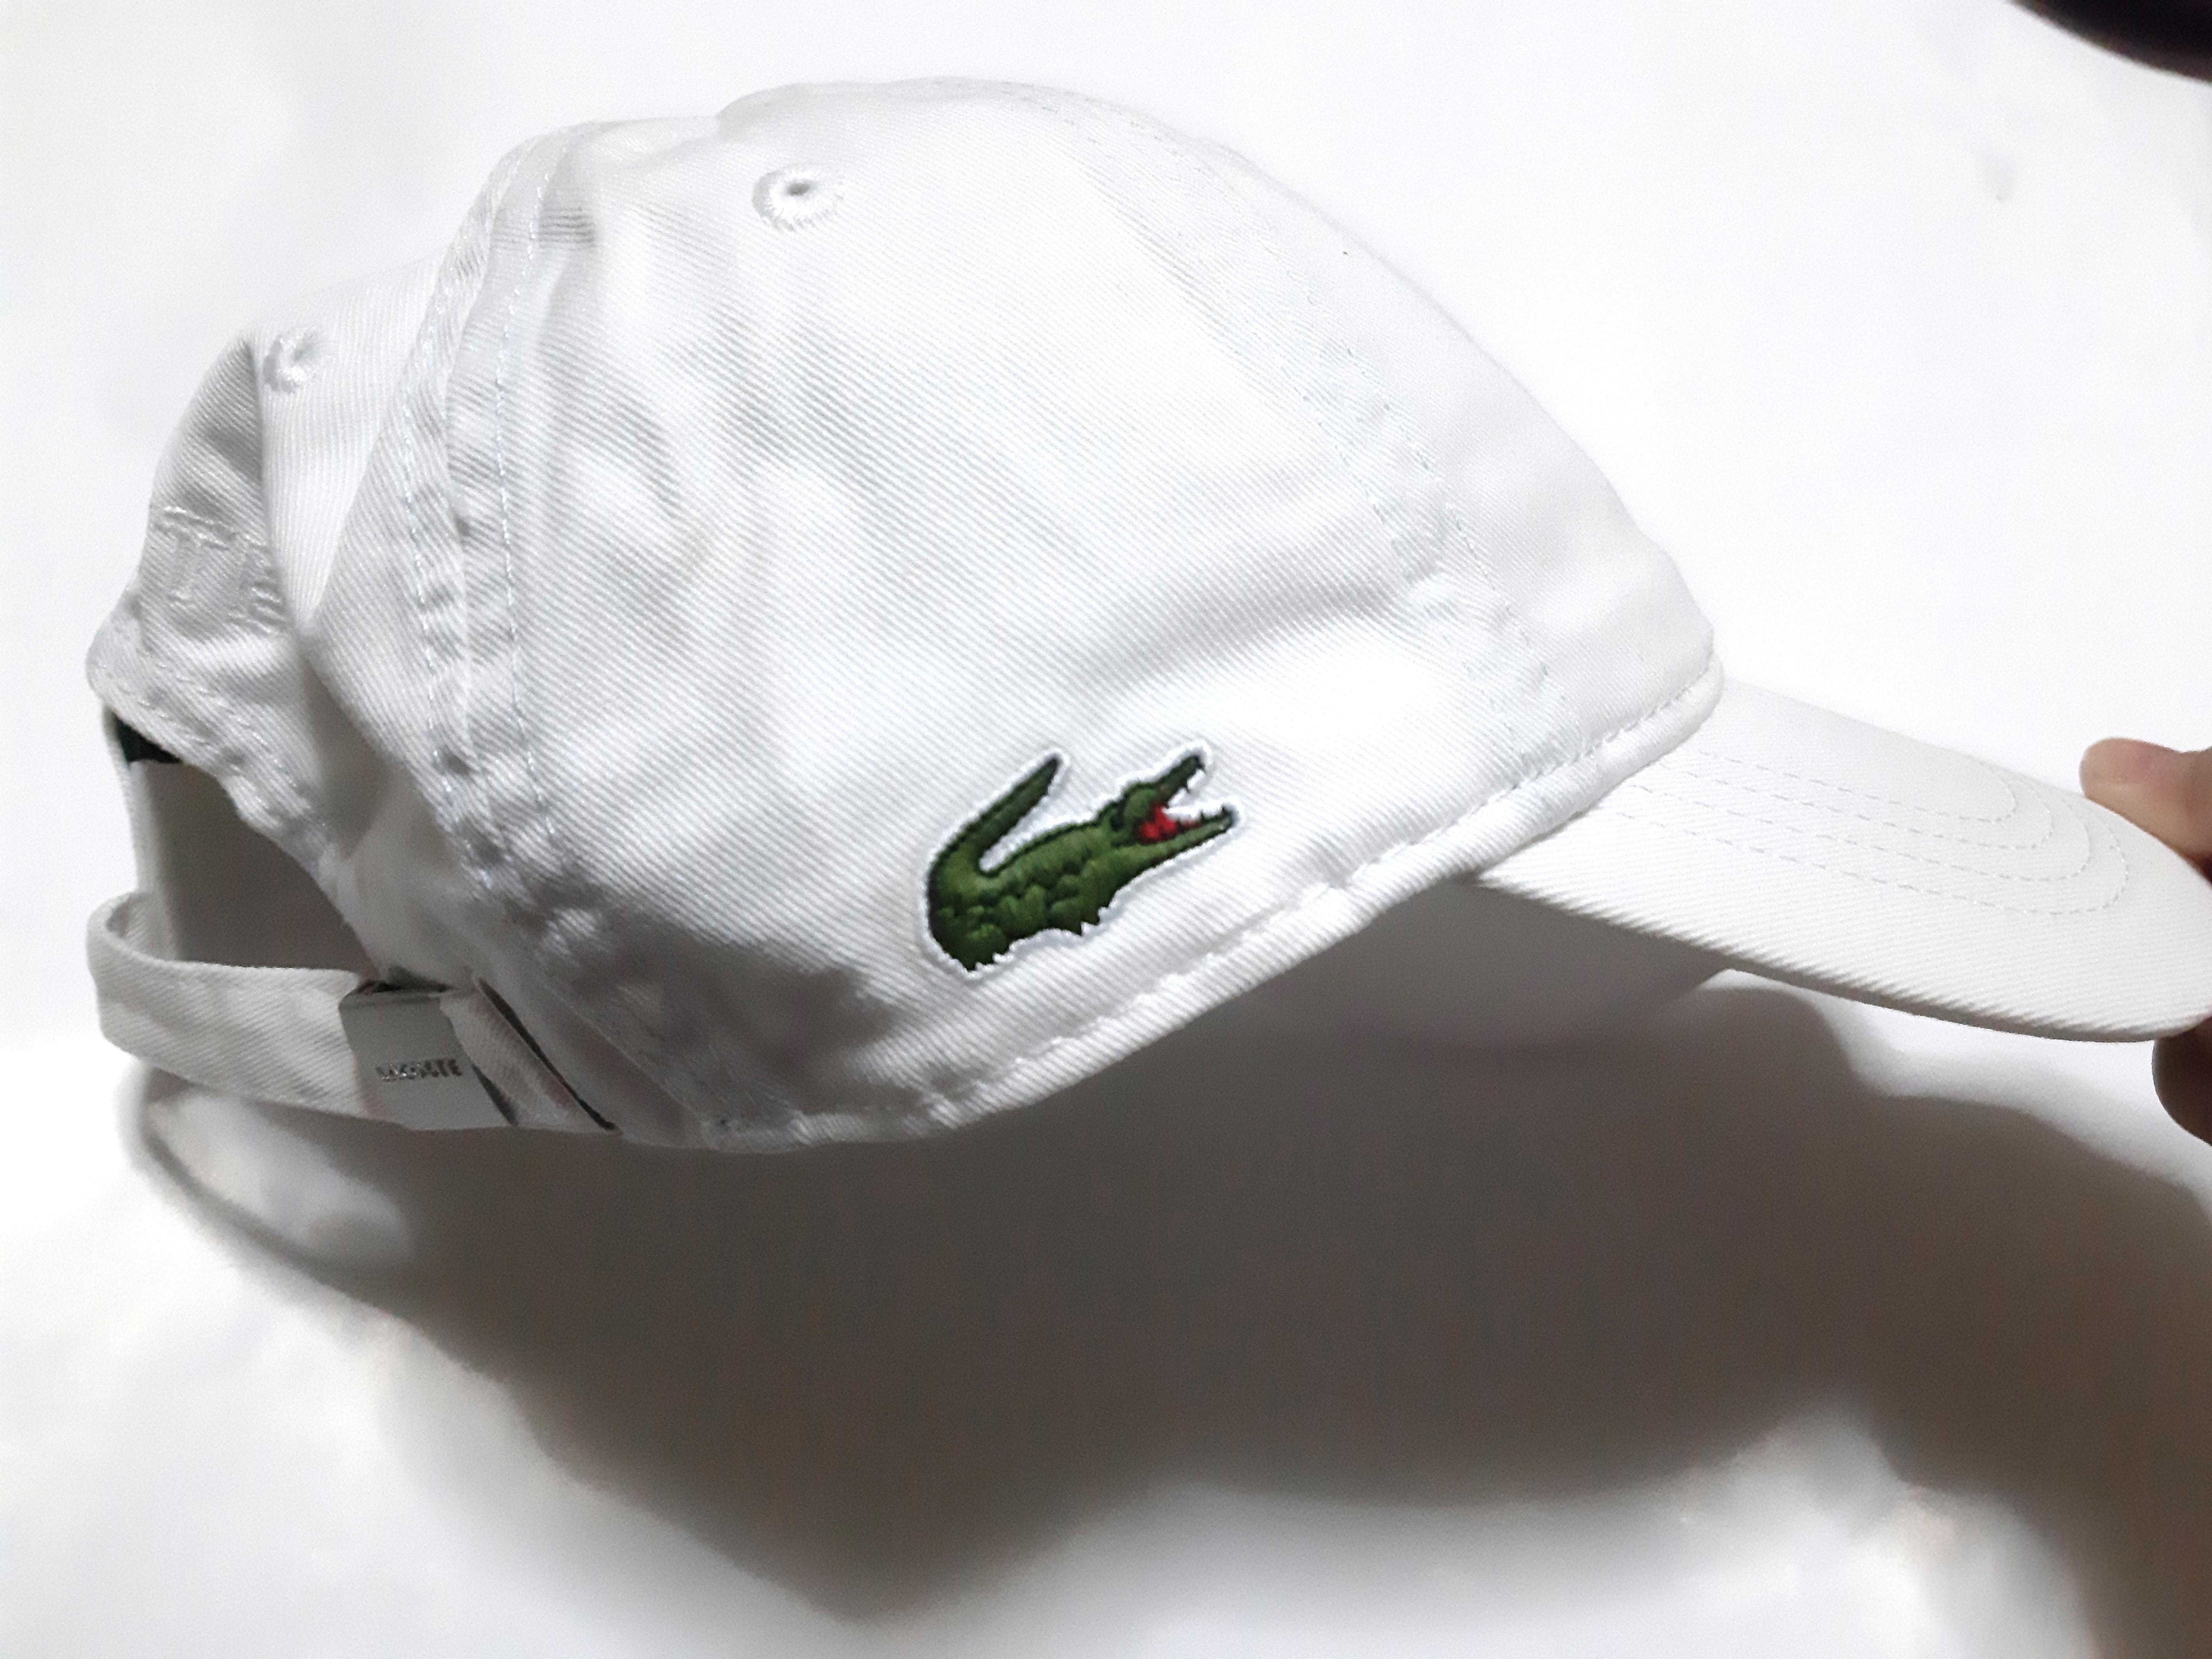 lacoste fairview mall